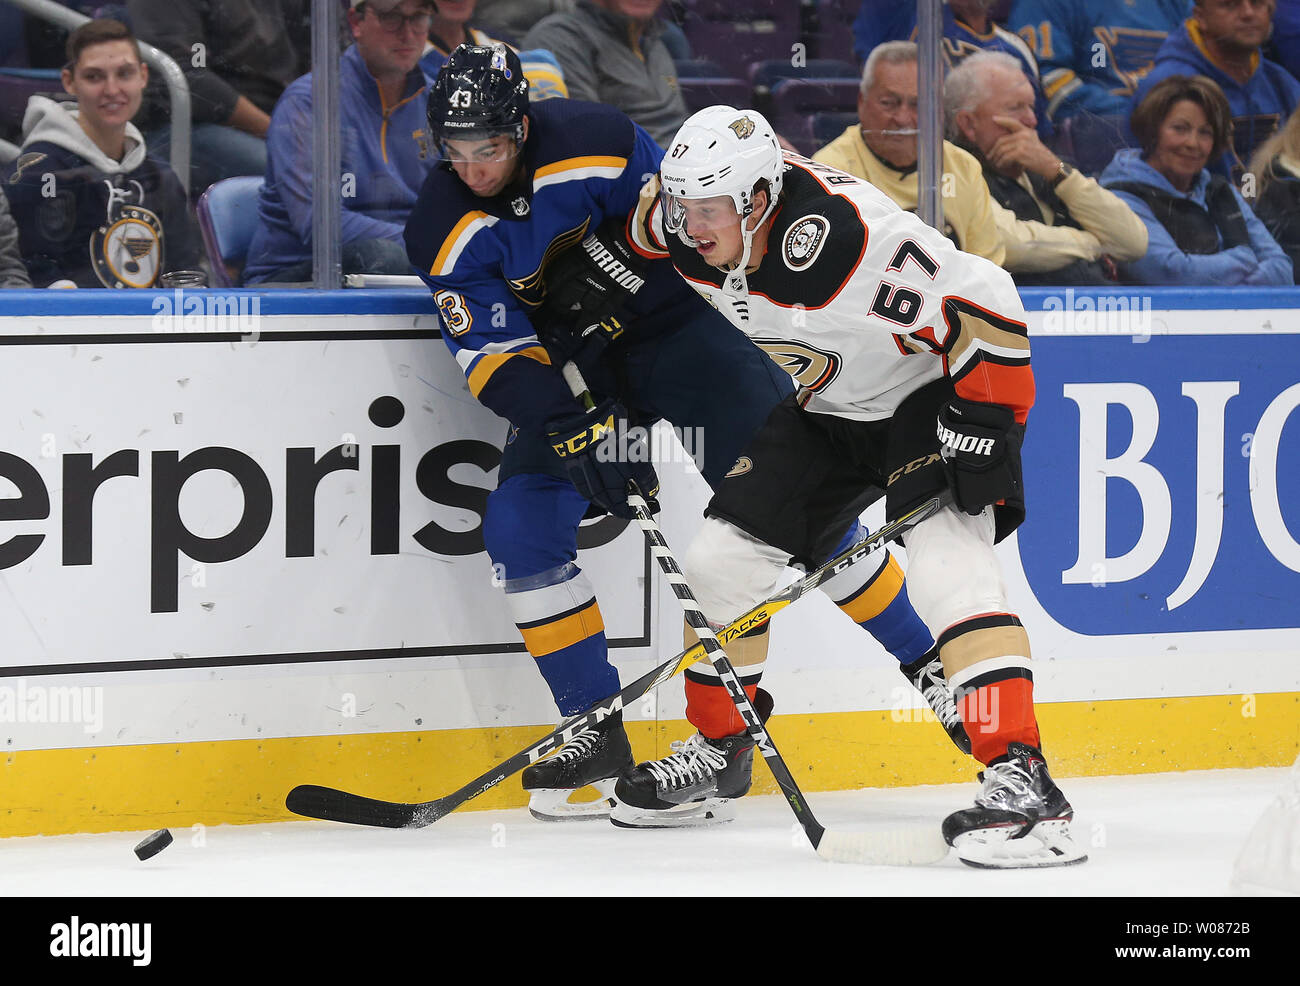 St. Louis Blues Jordan Schmaltz battles Anaheim Ducks Rickard Rakell of  Sweden for the puck in the first period at the Enterprise Center in St.  Louis on October 14, 2018. Photo by